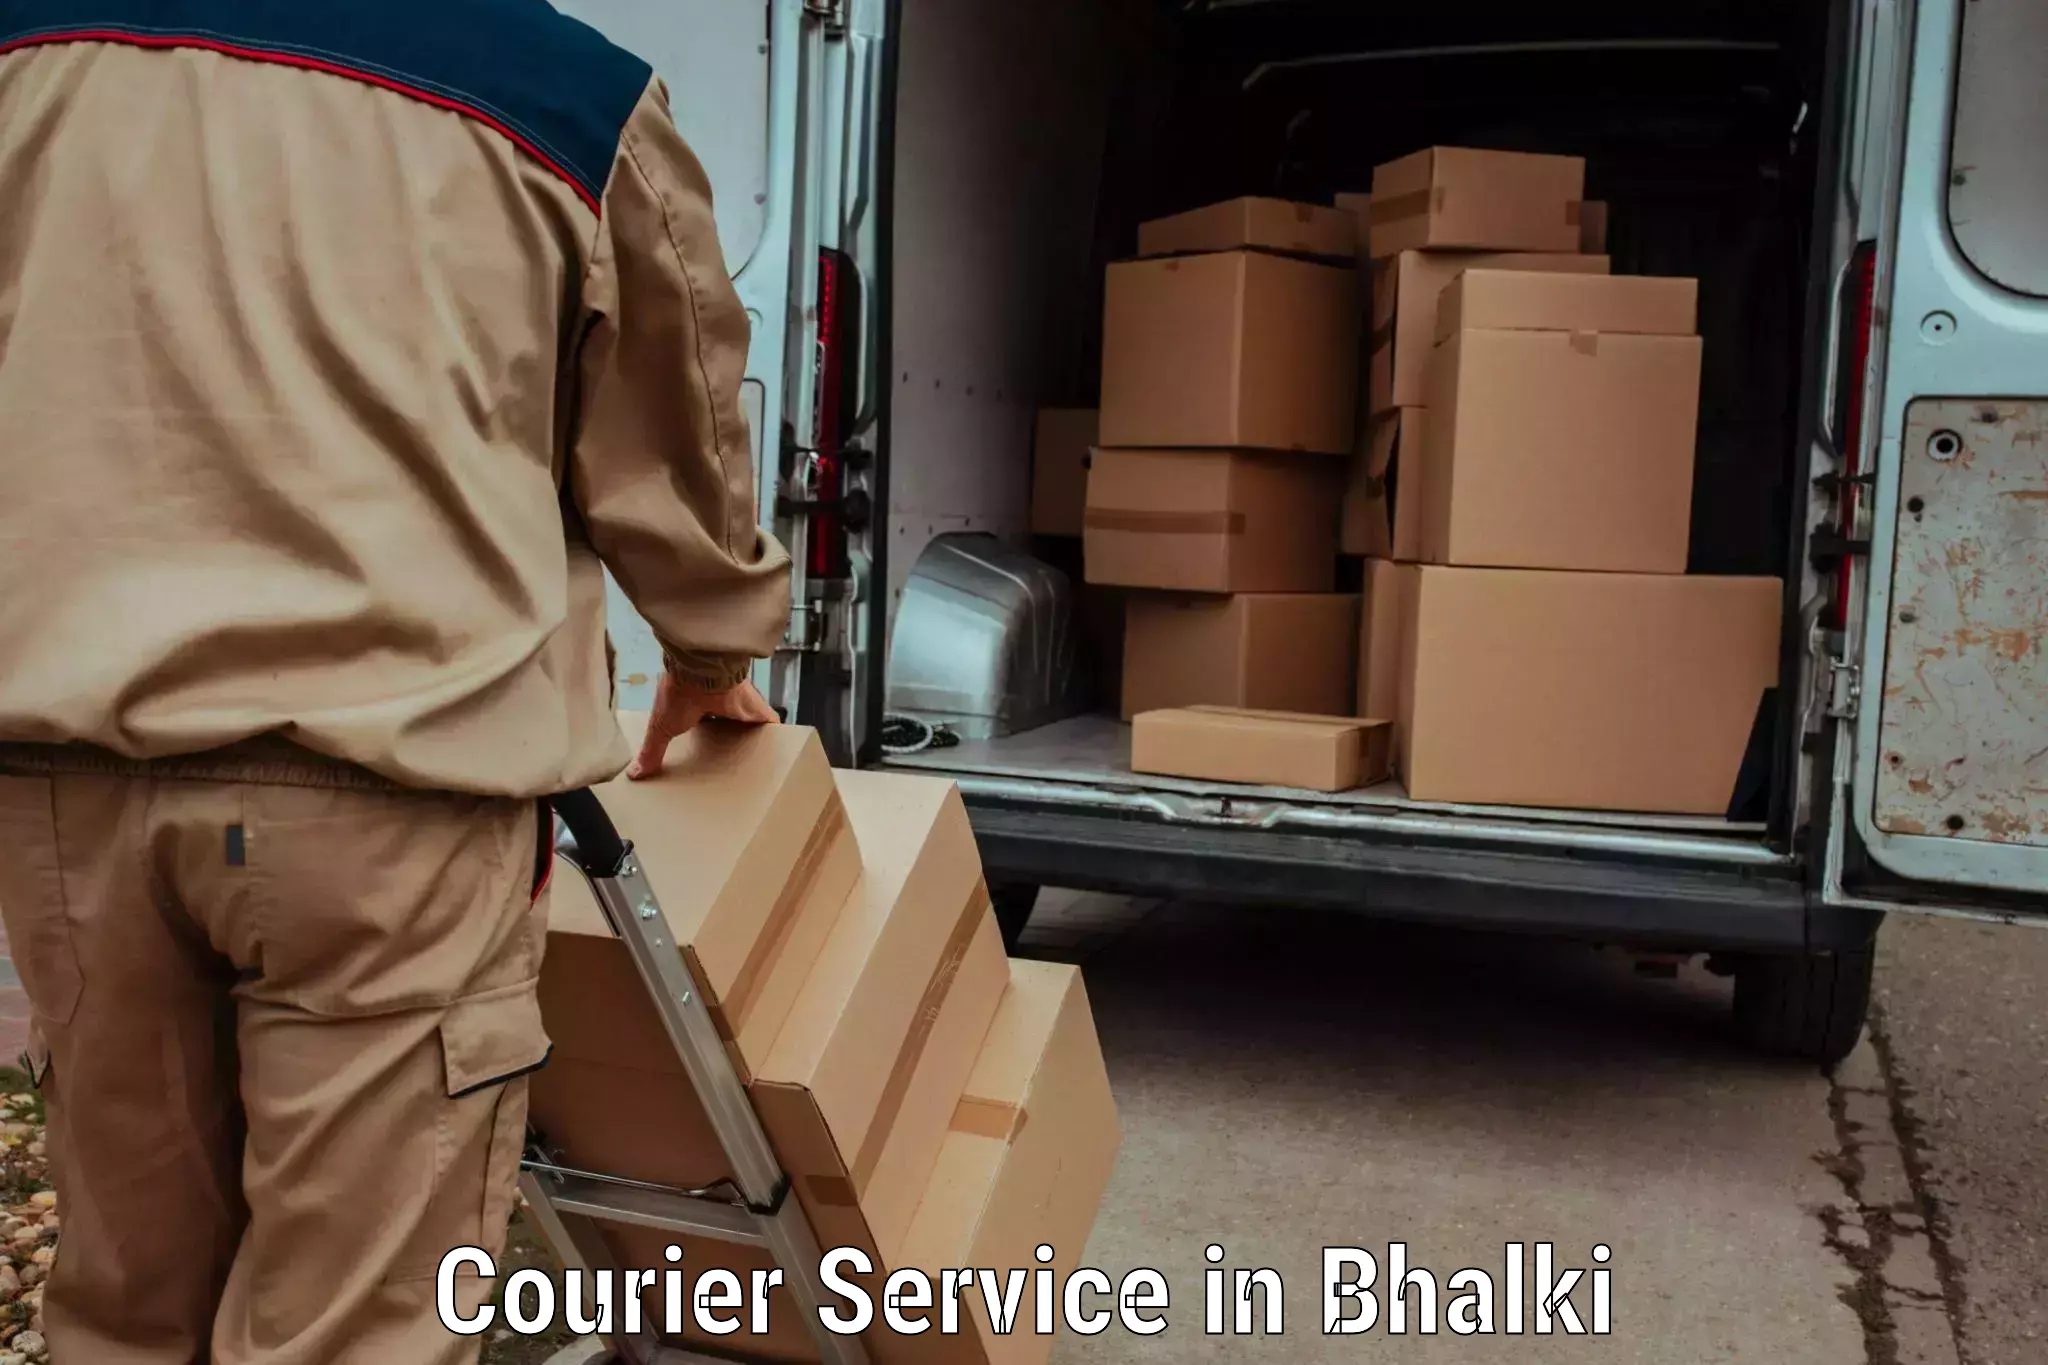 Courier service partnerships in Bhalki